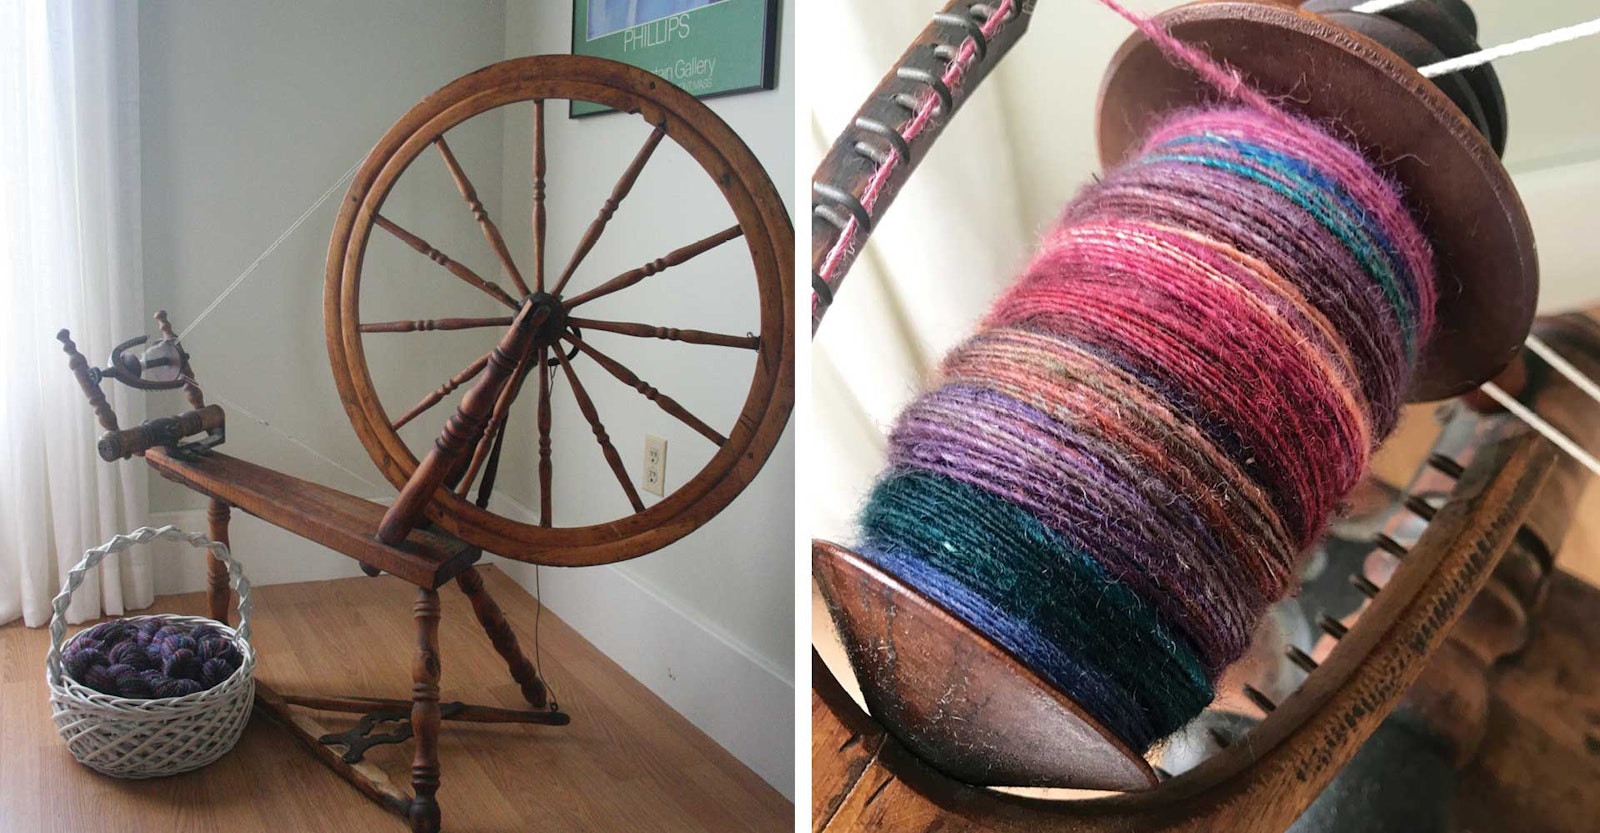 How to Spin Yarn on a Spinning Wheel - Expression Fiber Arts